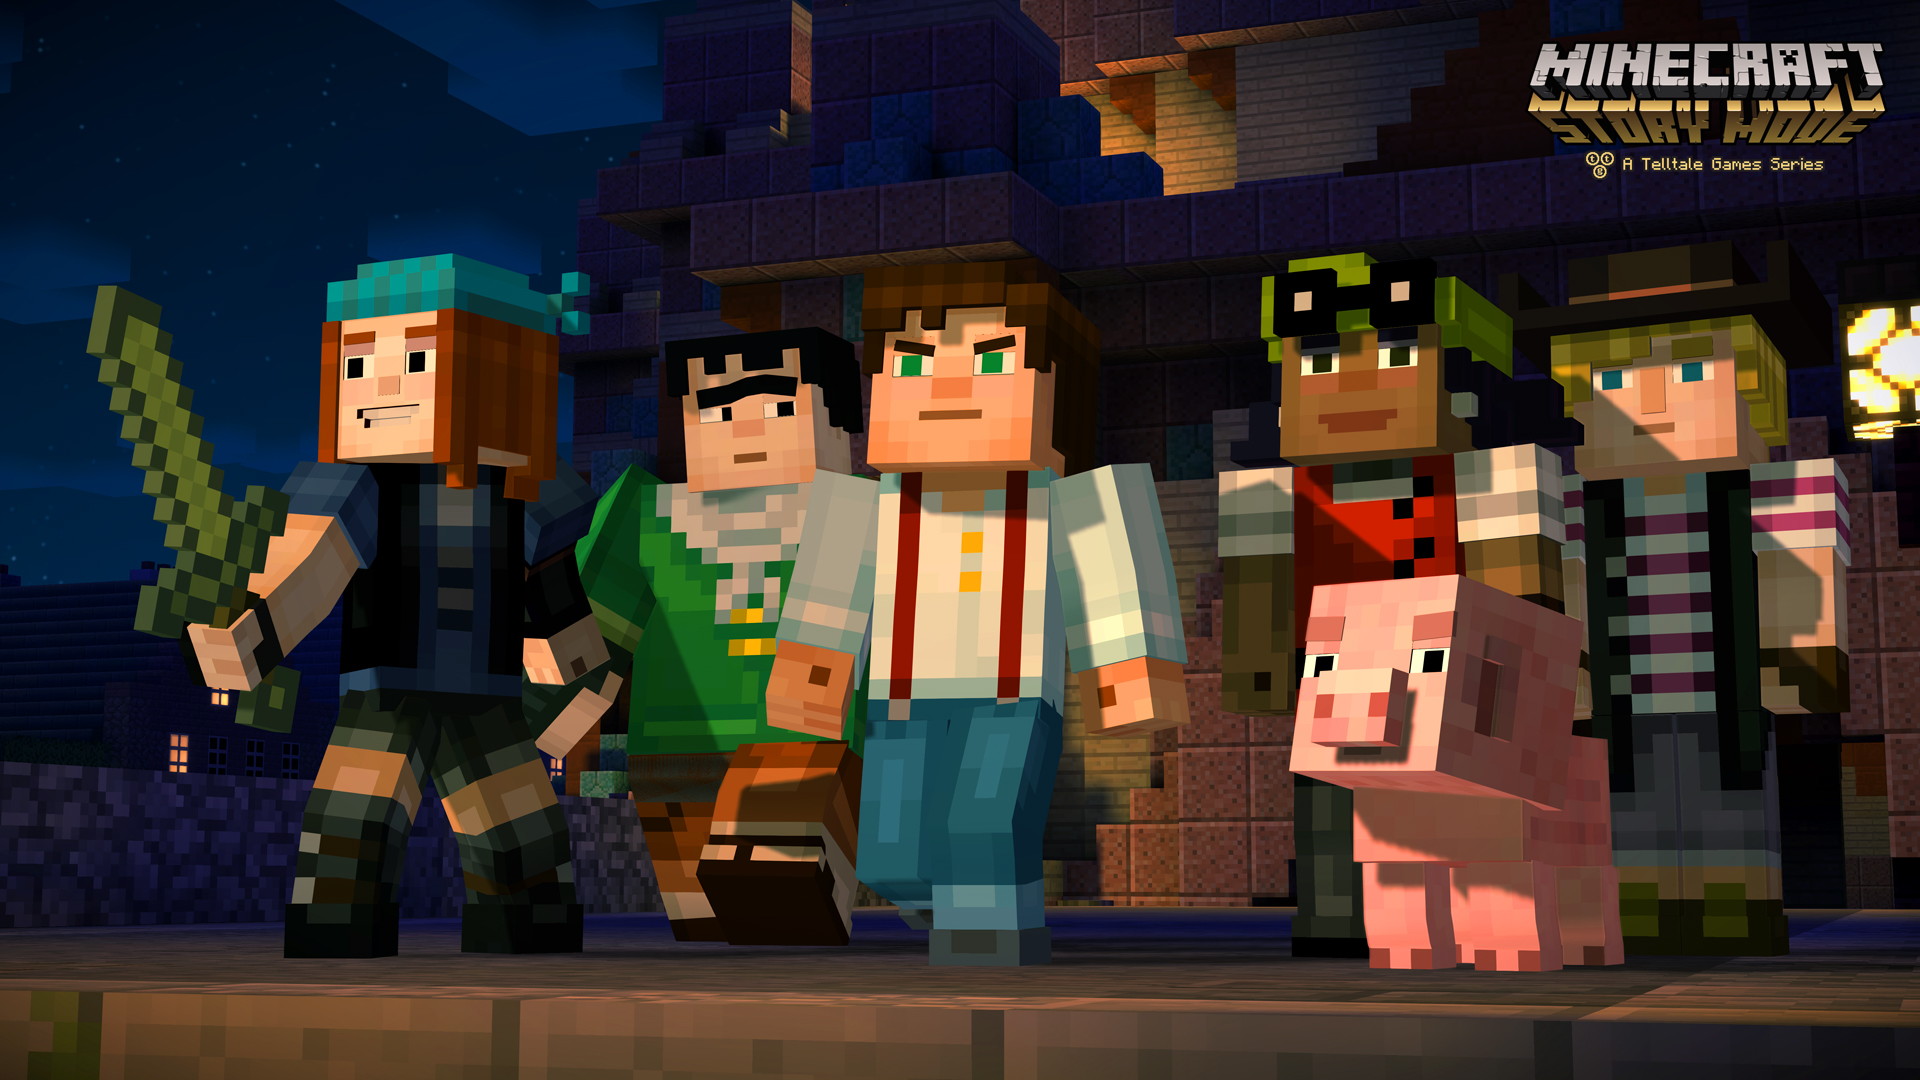 Minecraft: Story Mode - Episode 1: The Order of the Stone - screenshot 19